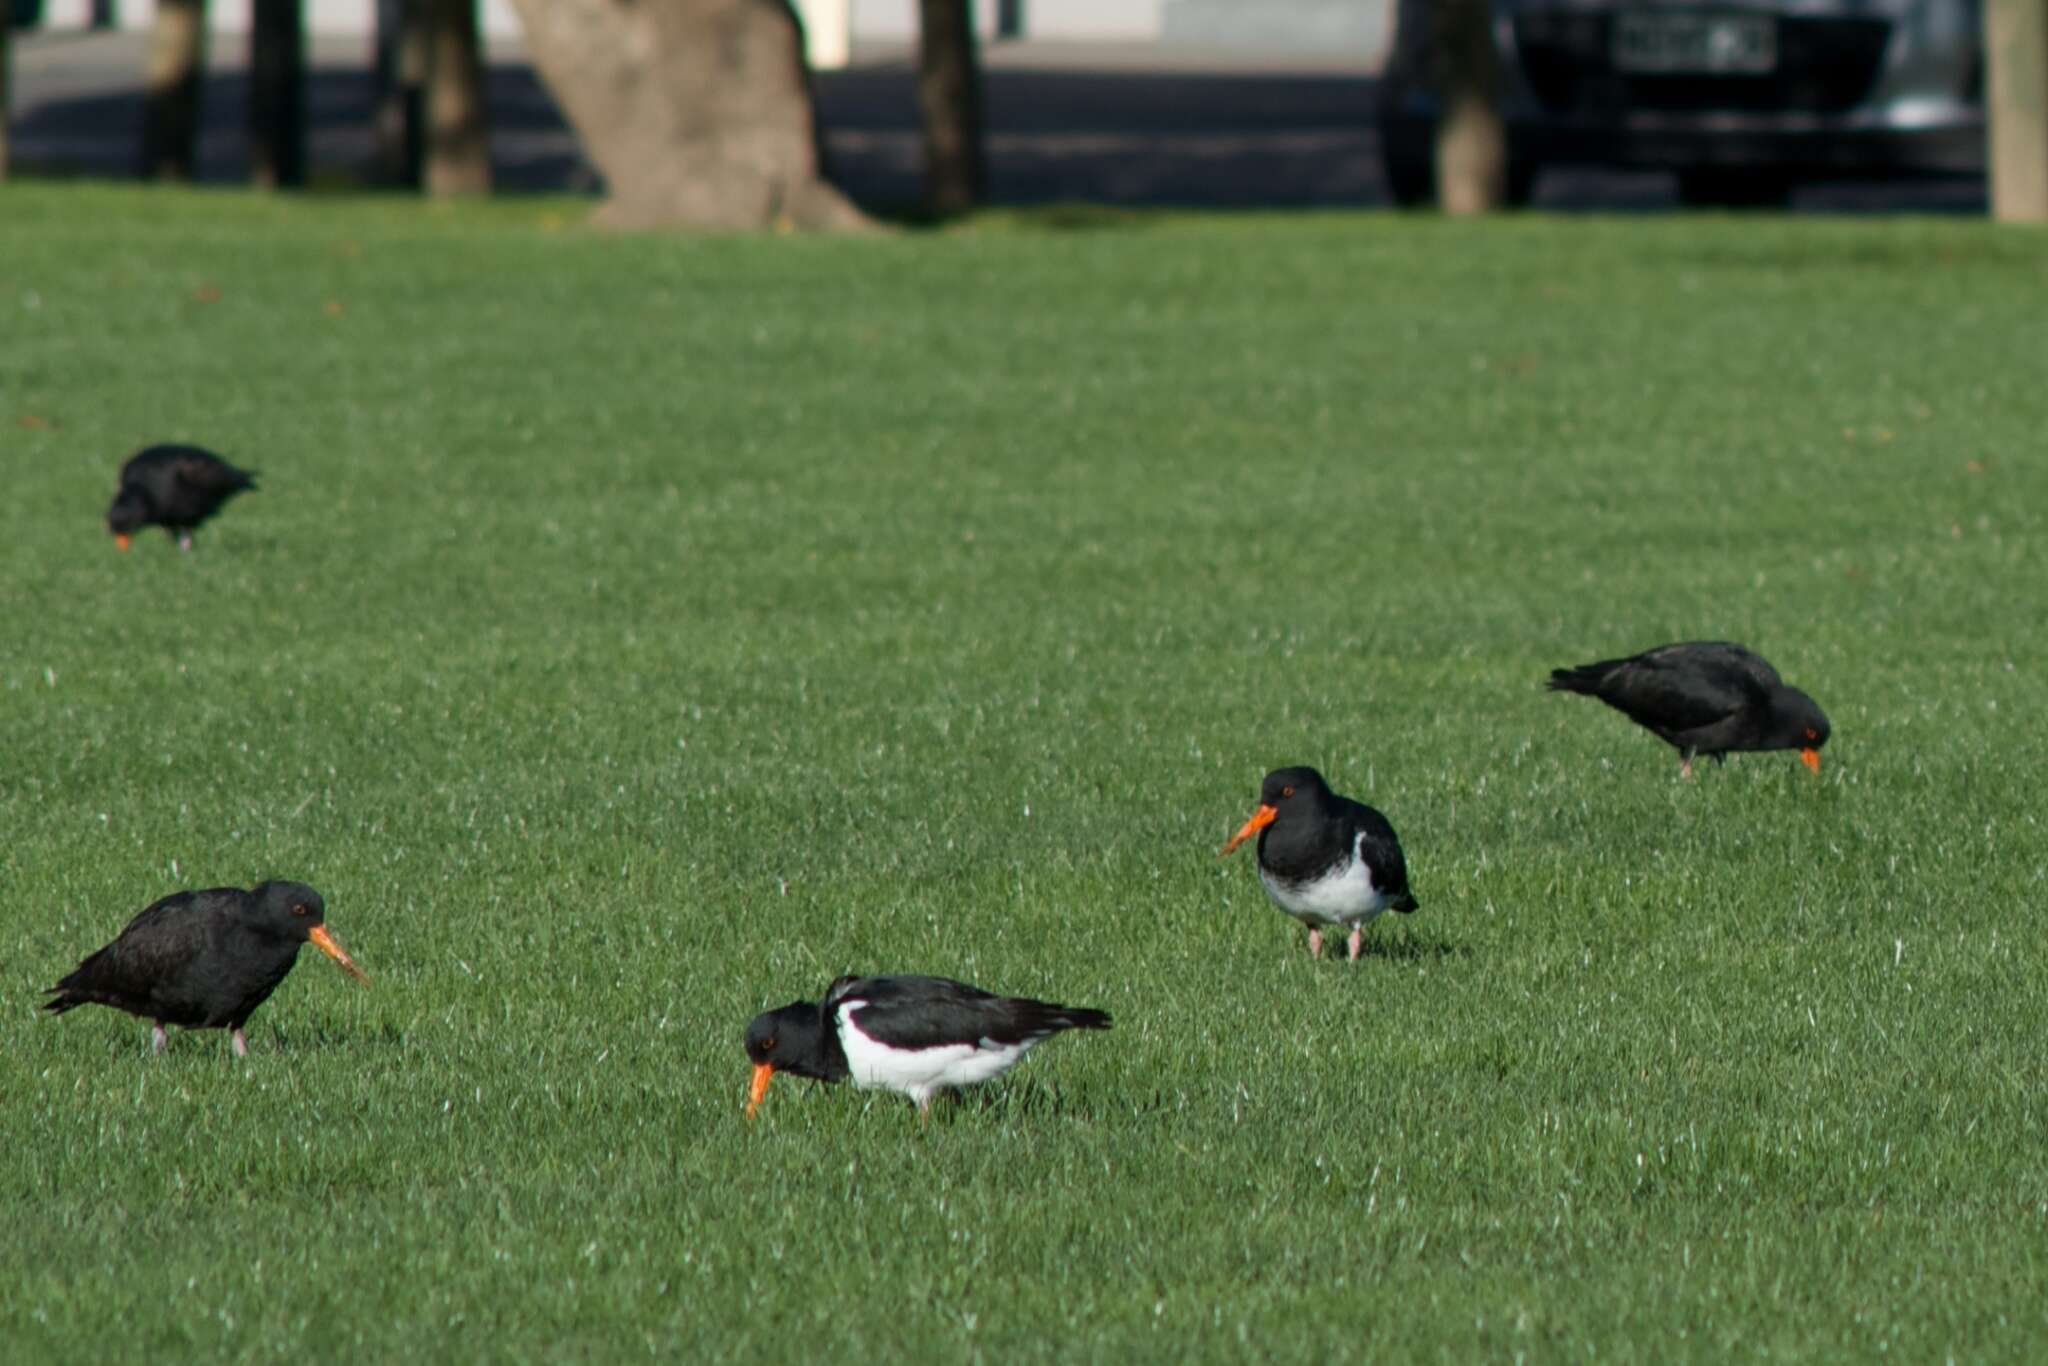 Image of South Island Oystercatcher